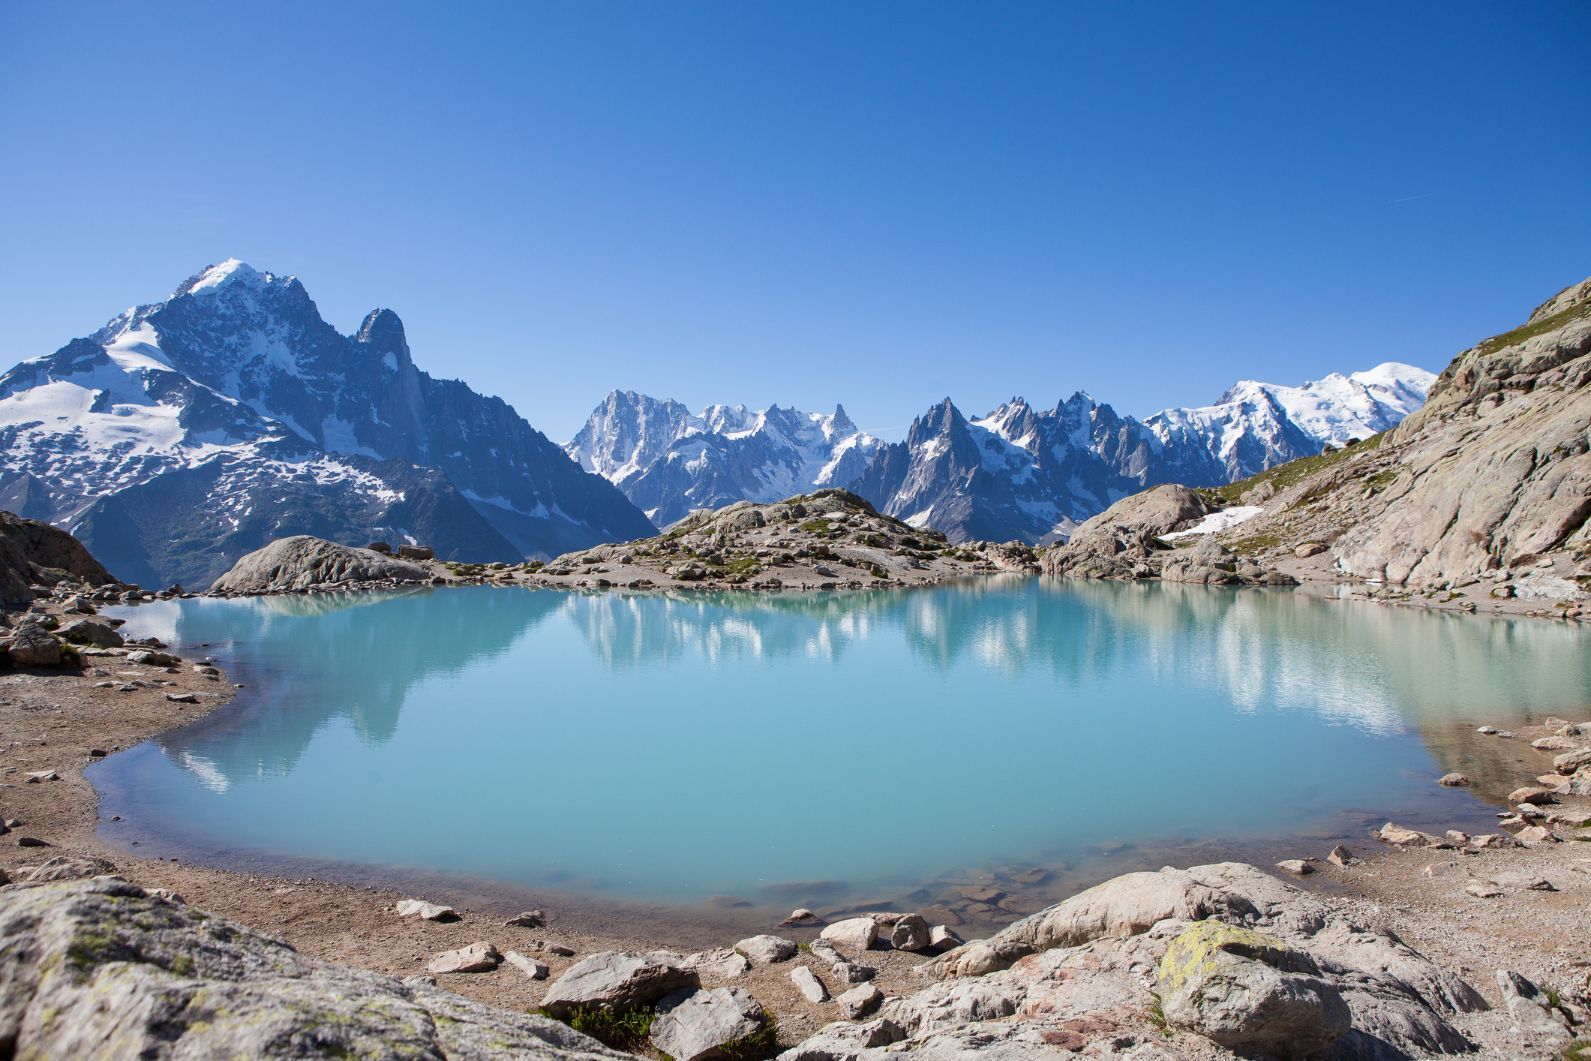 The snow-capped Mont Blanc massif reflected in the crystal waters of Lac Blanc in the French Alps